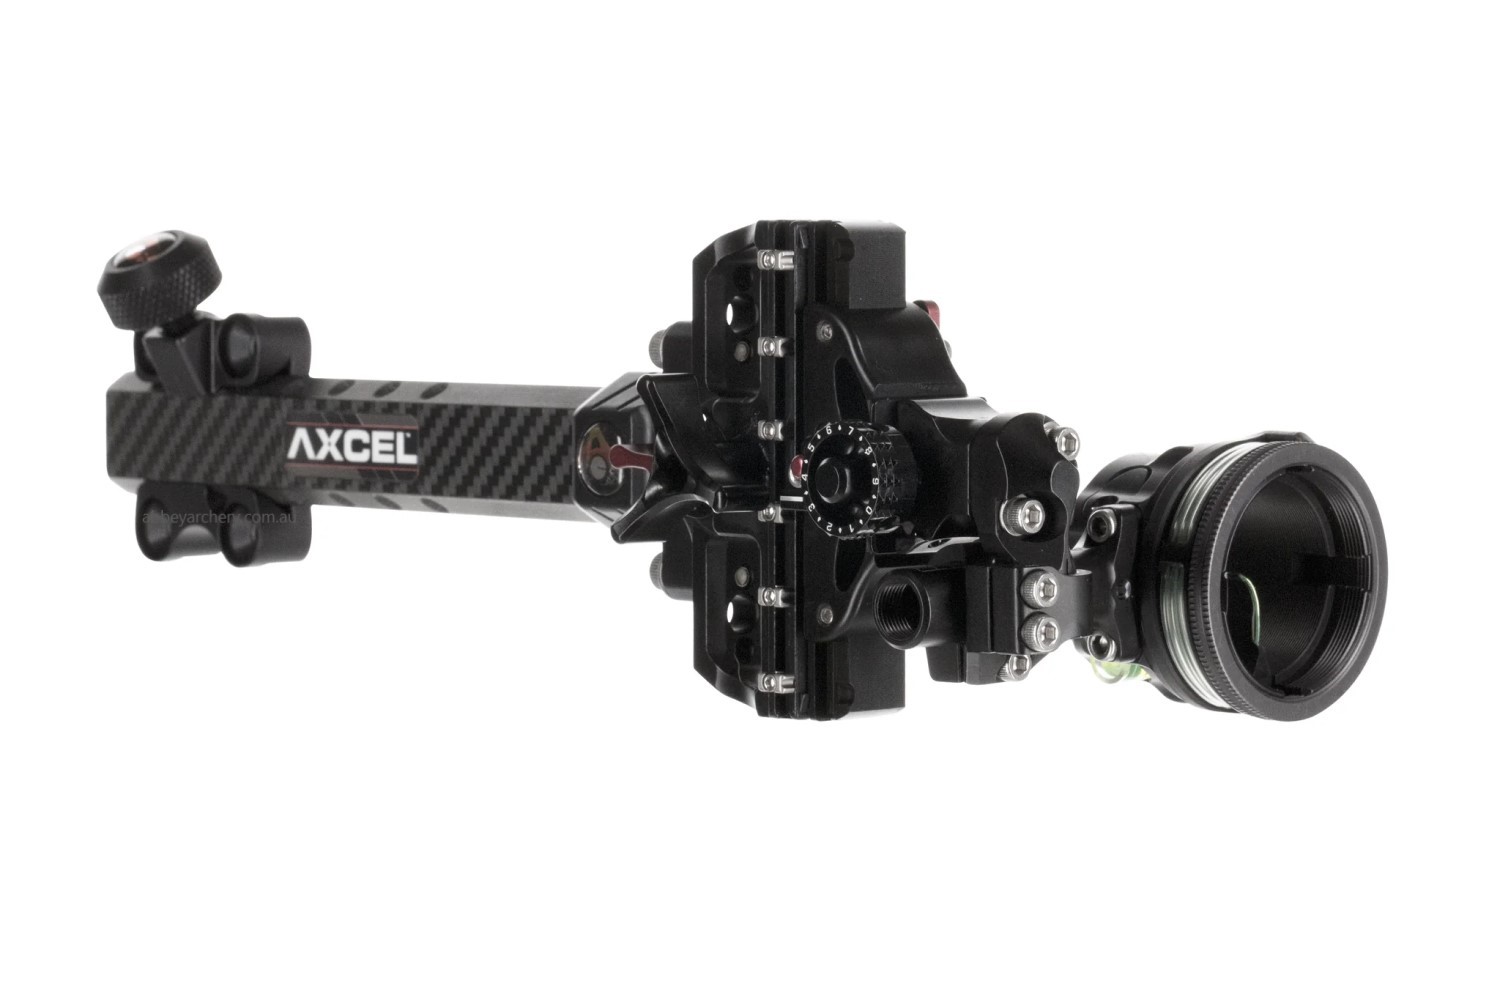 Axcel AccuTouch Carbon Pro Single pin Slider sight with AVX41 scope black large image. Click to return to Axcel AccuTouch Carbon Pro Single pin Slider sight with AVX41 scope black price and description